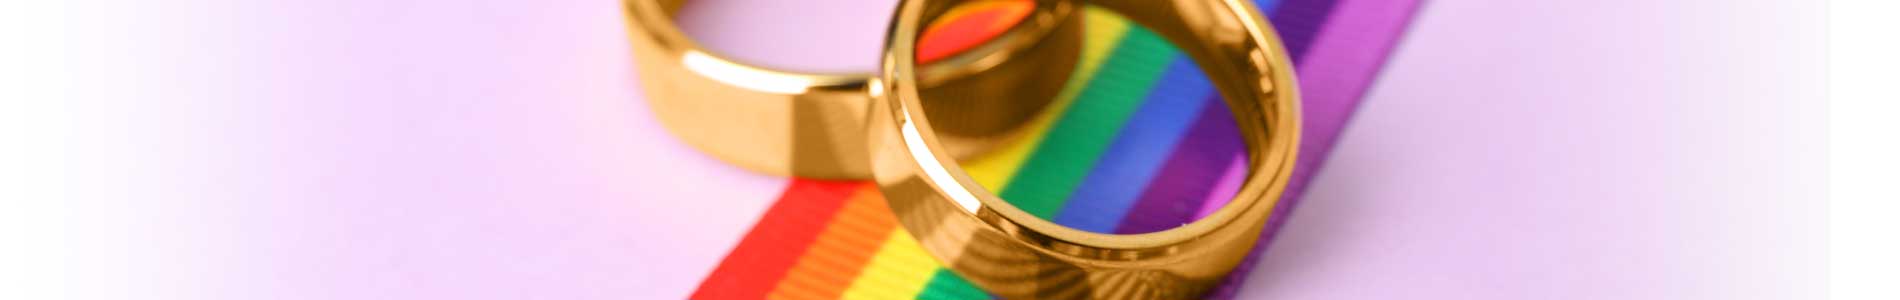 Two golden wedding rings laying on rainbow ribbon on pink background for LGBTQ awareness